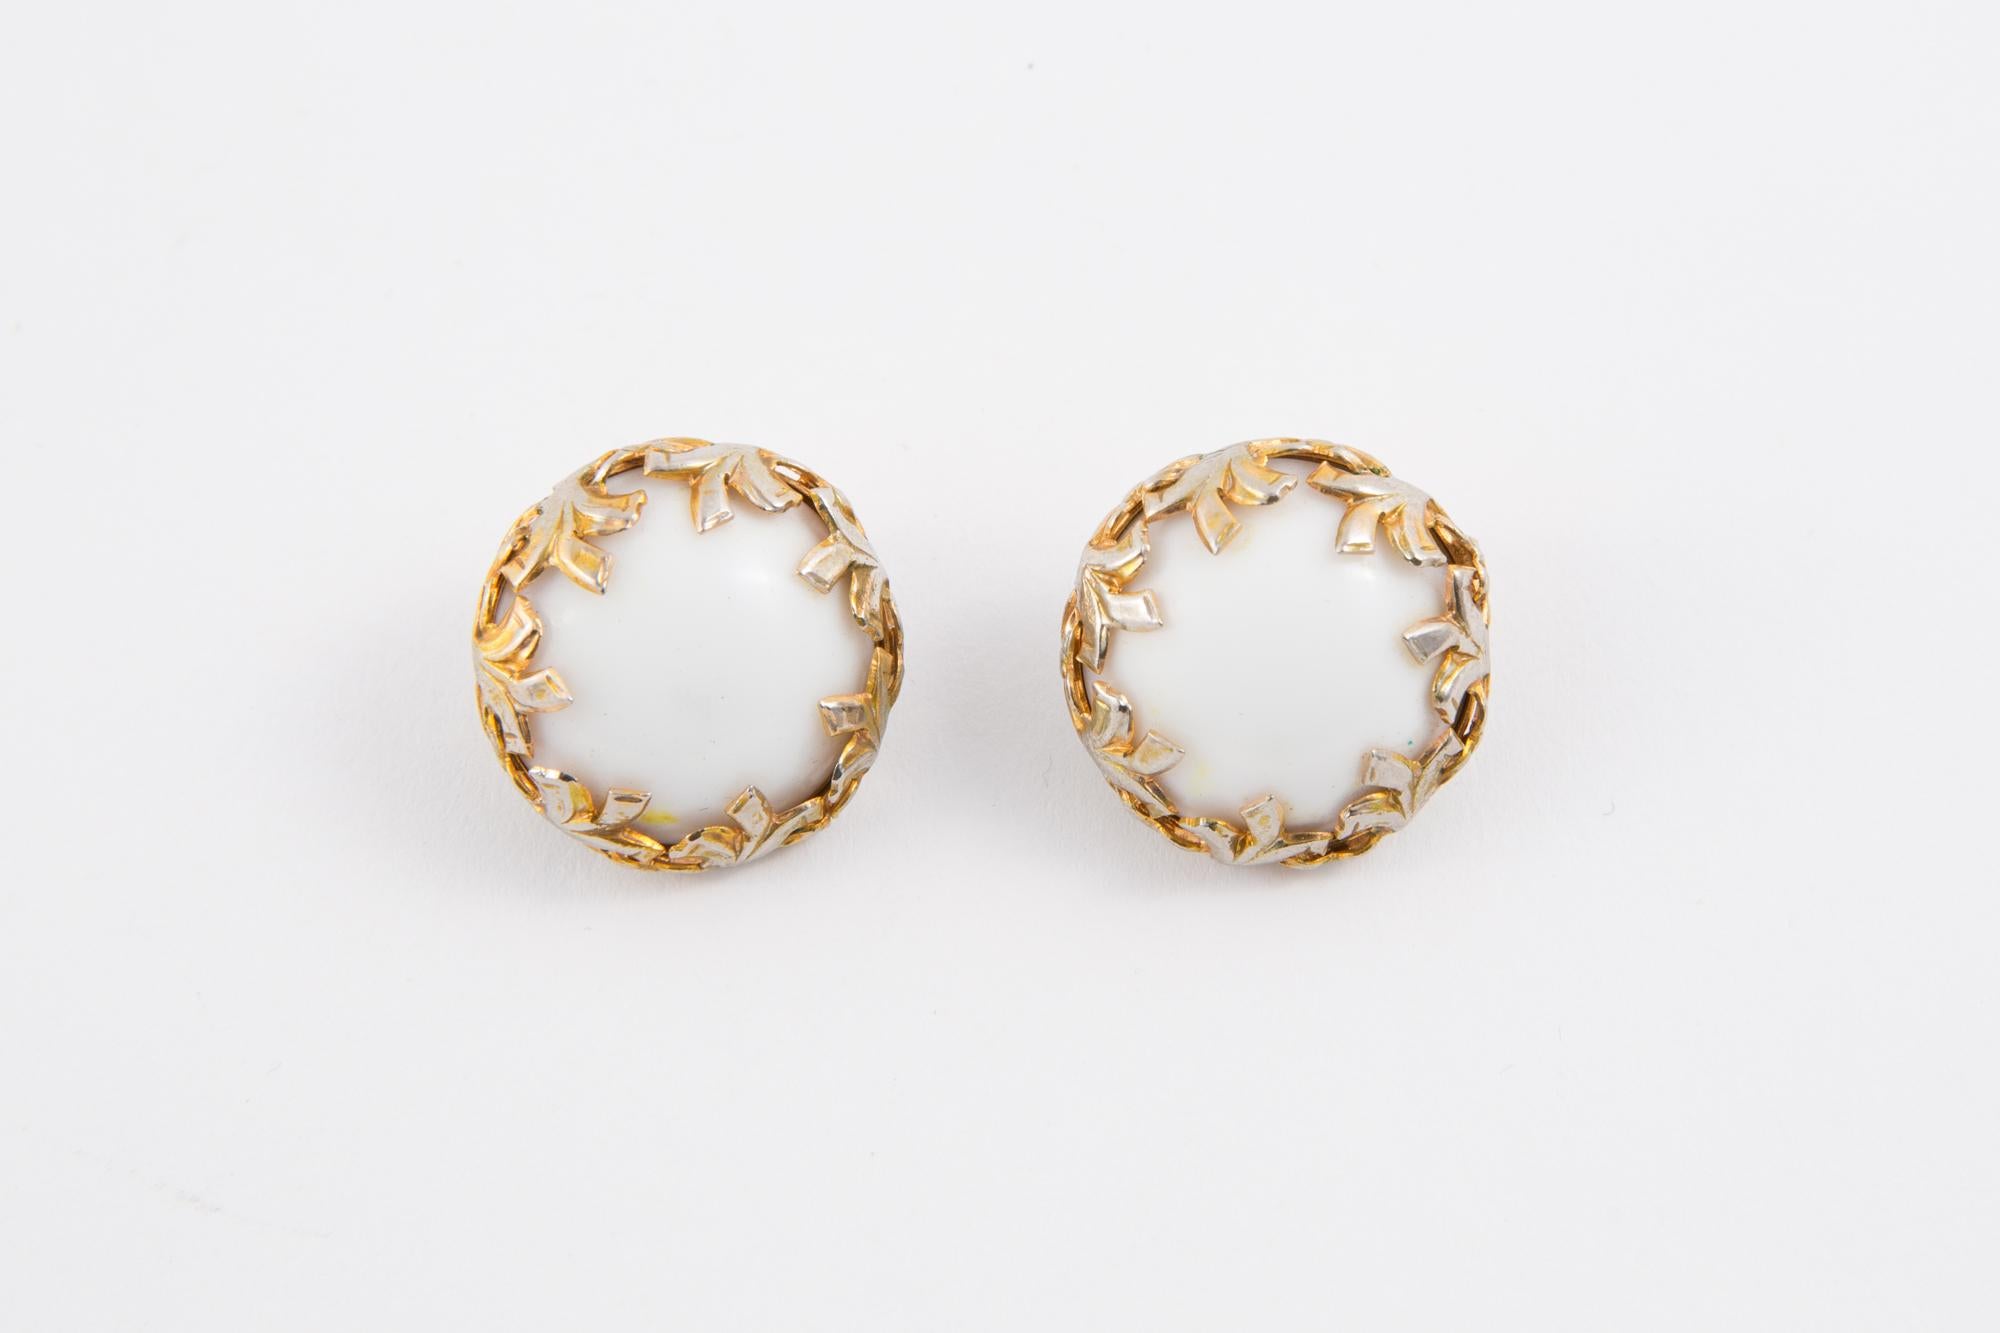 1950s white and gold tone flowers clip on earrings featuring white resin beads, a back clip fastening.  
In good vintage condition  Made in France. 
These earrings come as a pair. 
Width diameter: 1in (2.5cm)
We guarantee you will receive this